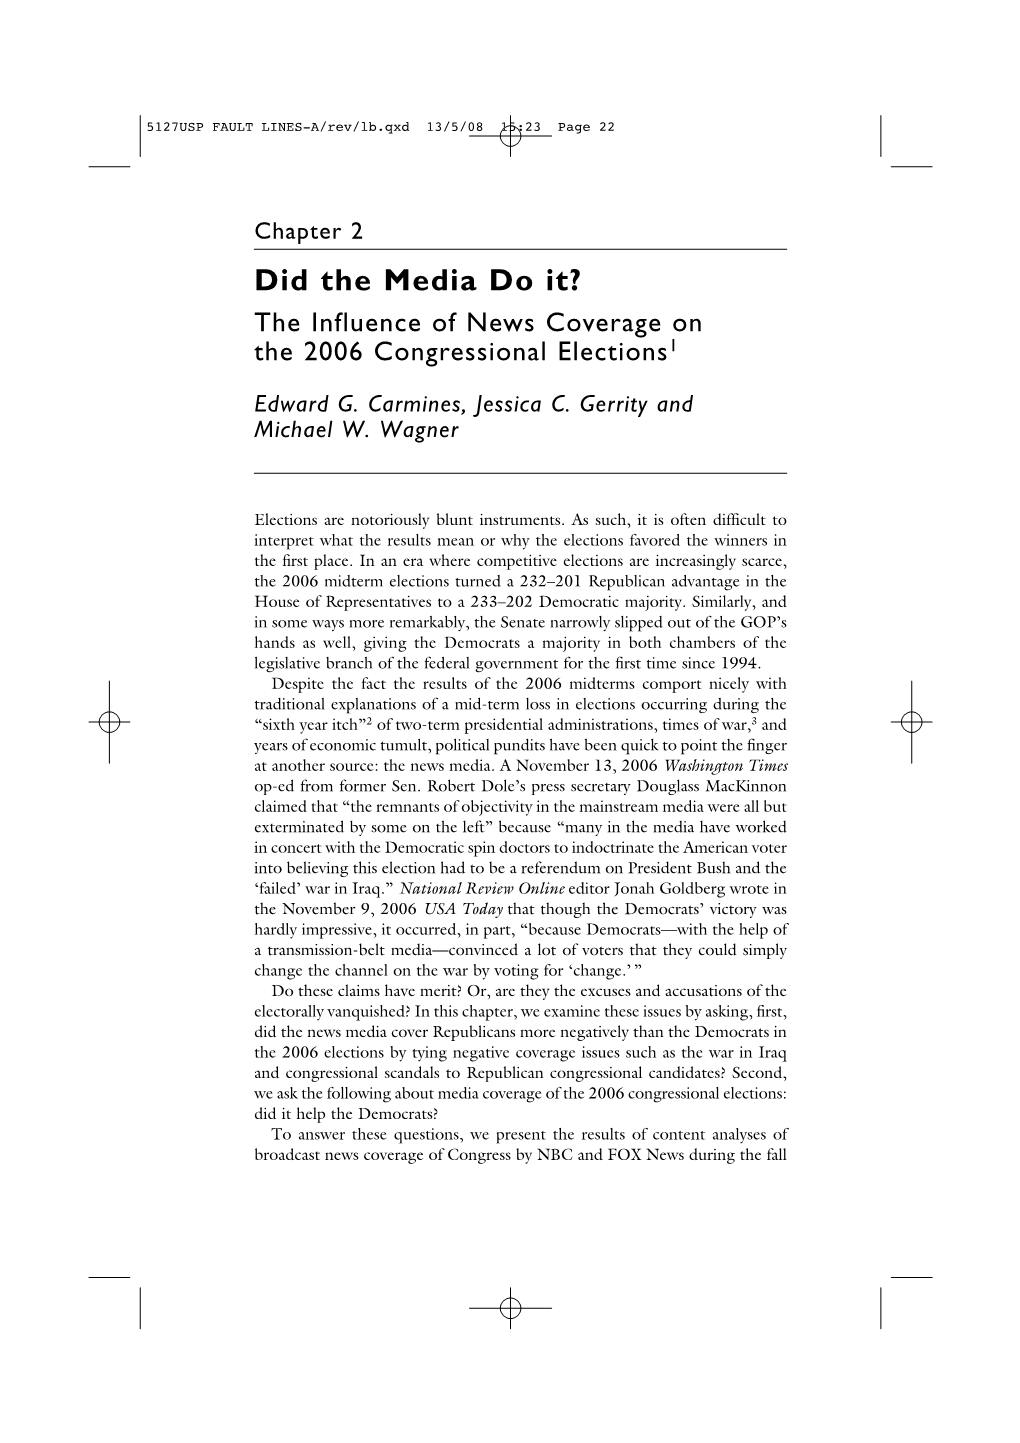 Did the Media Do It? the Influence of News Coverage on the 2006 Congressional Elections1